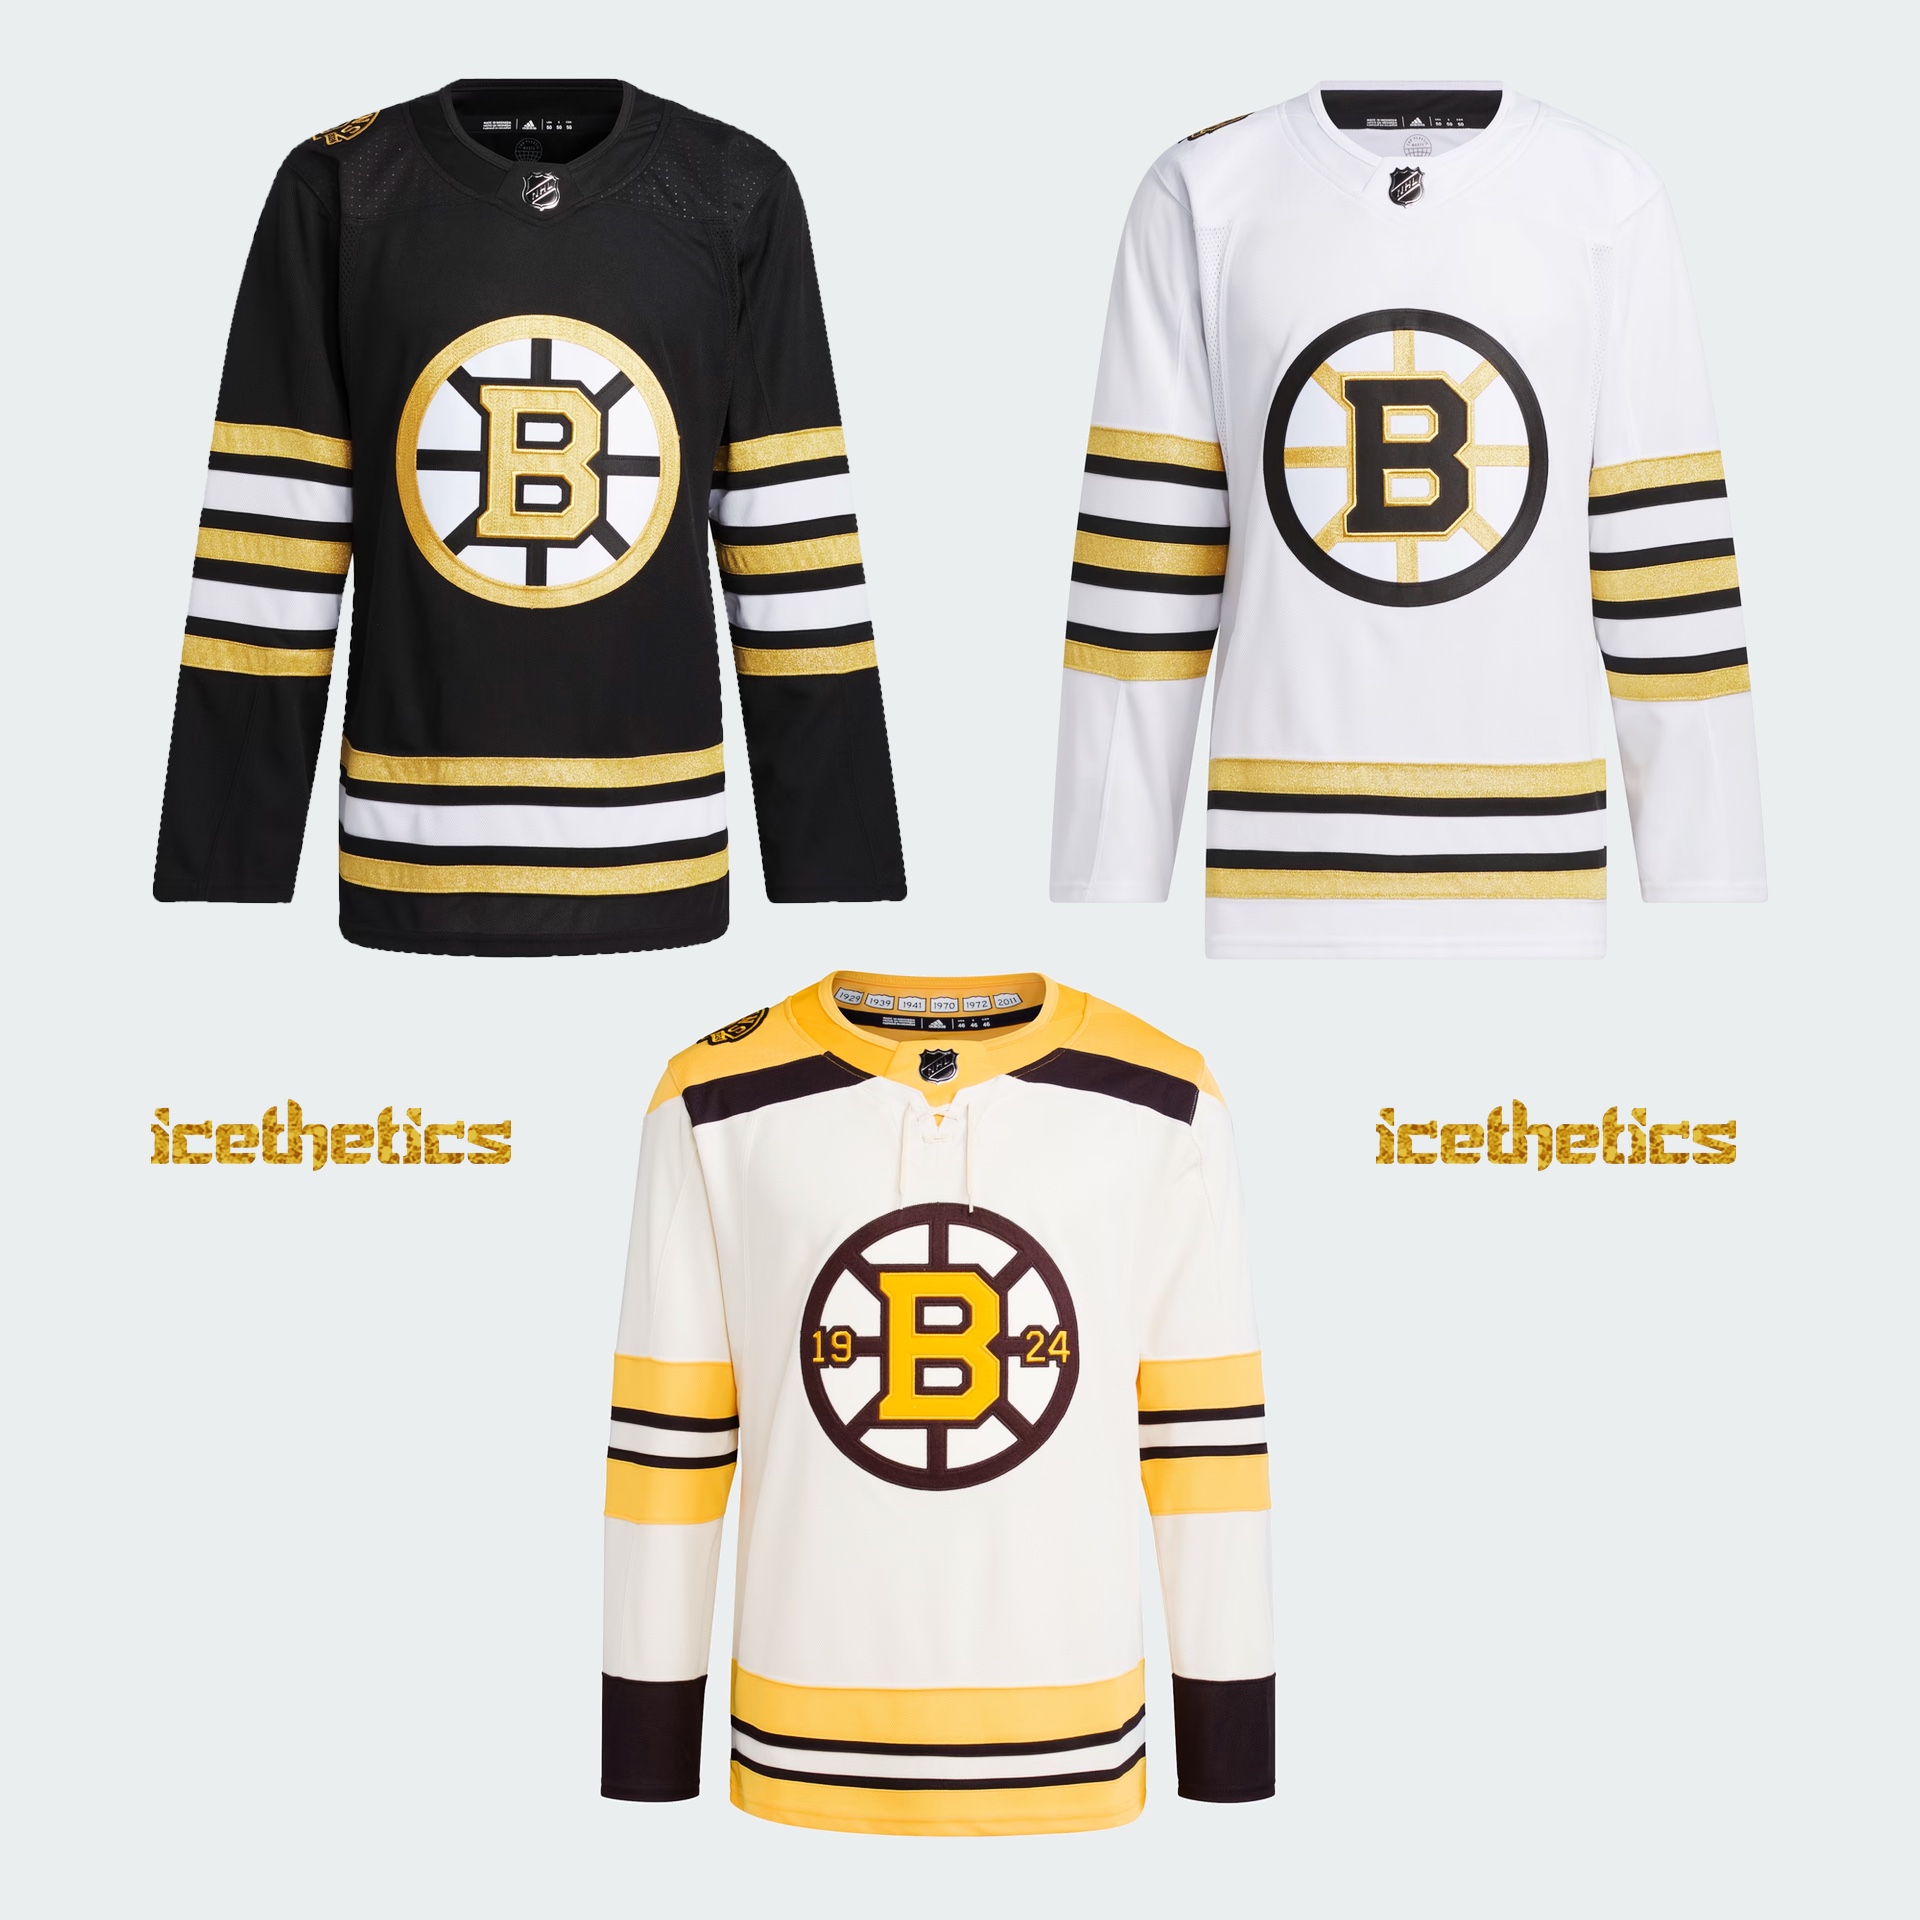 icethetics on X: Every #NHL team just tweeted their #ReverseRetro teaser  videos (except PIT so far). Confirmations across the board. Fun game to  play this morning. Full jerseys coming soon!  /